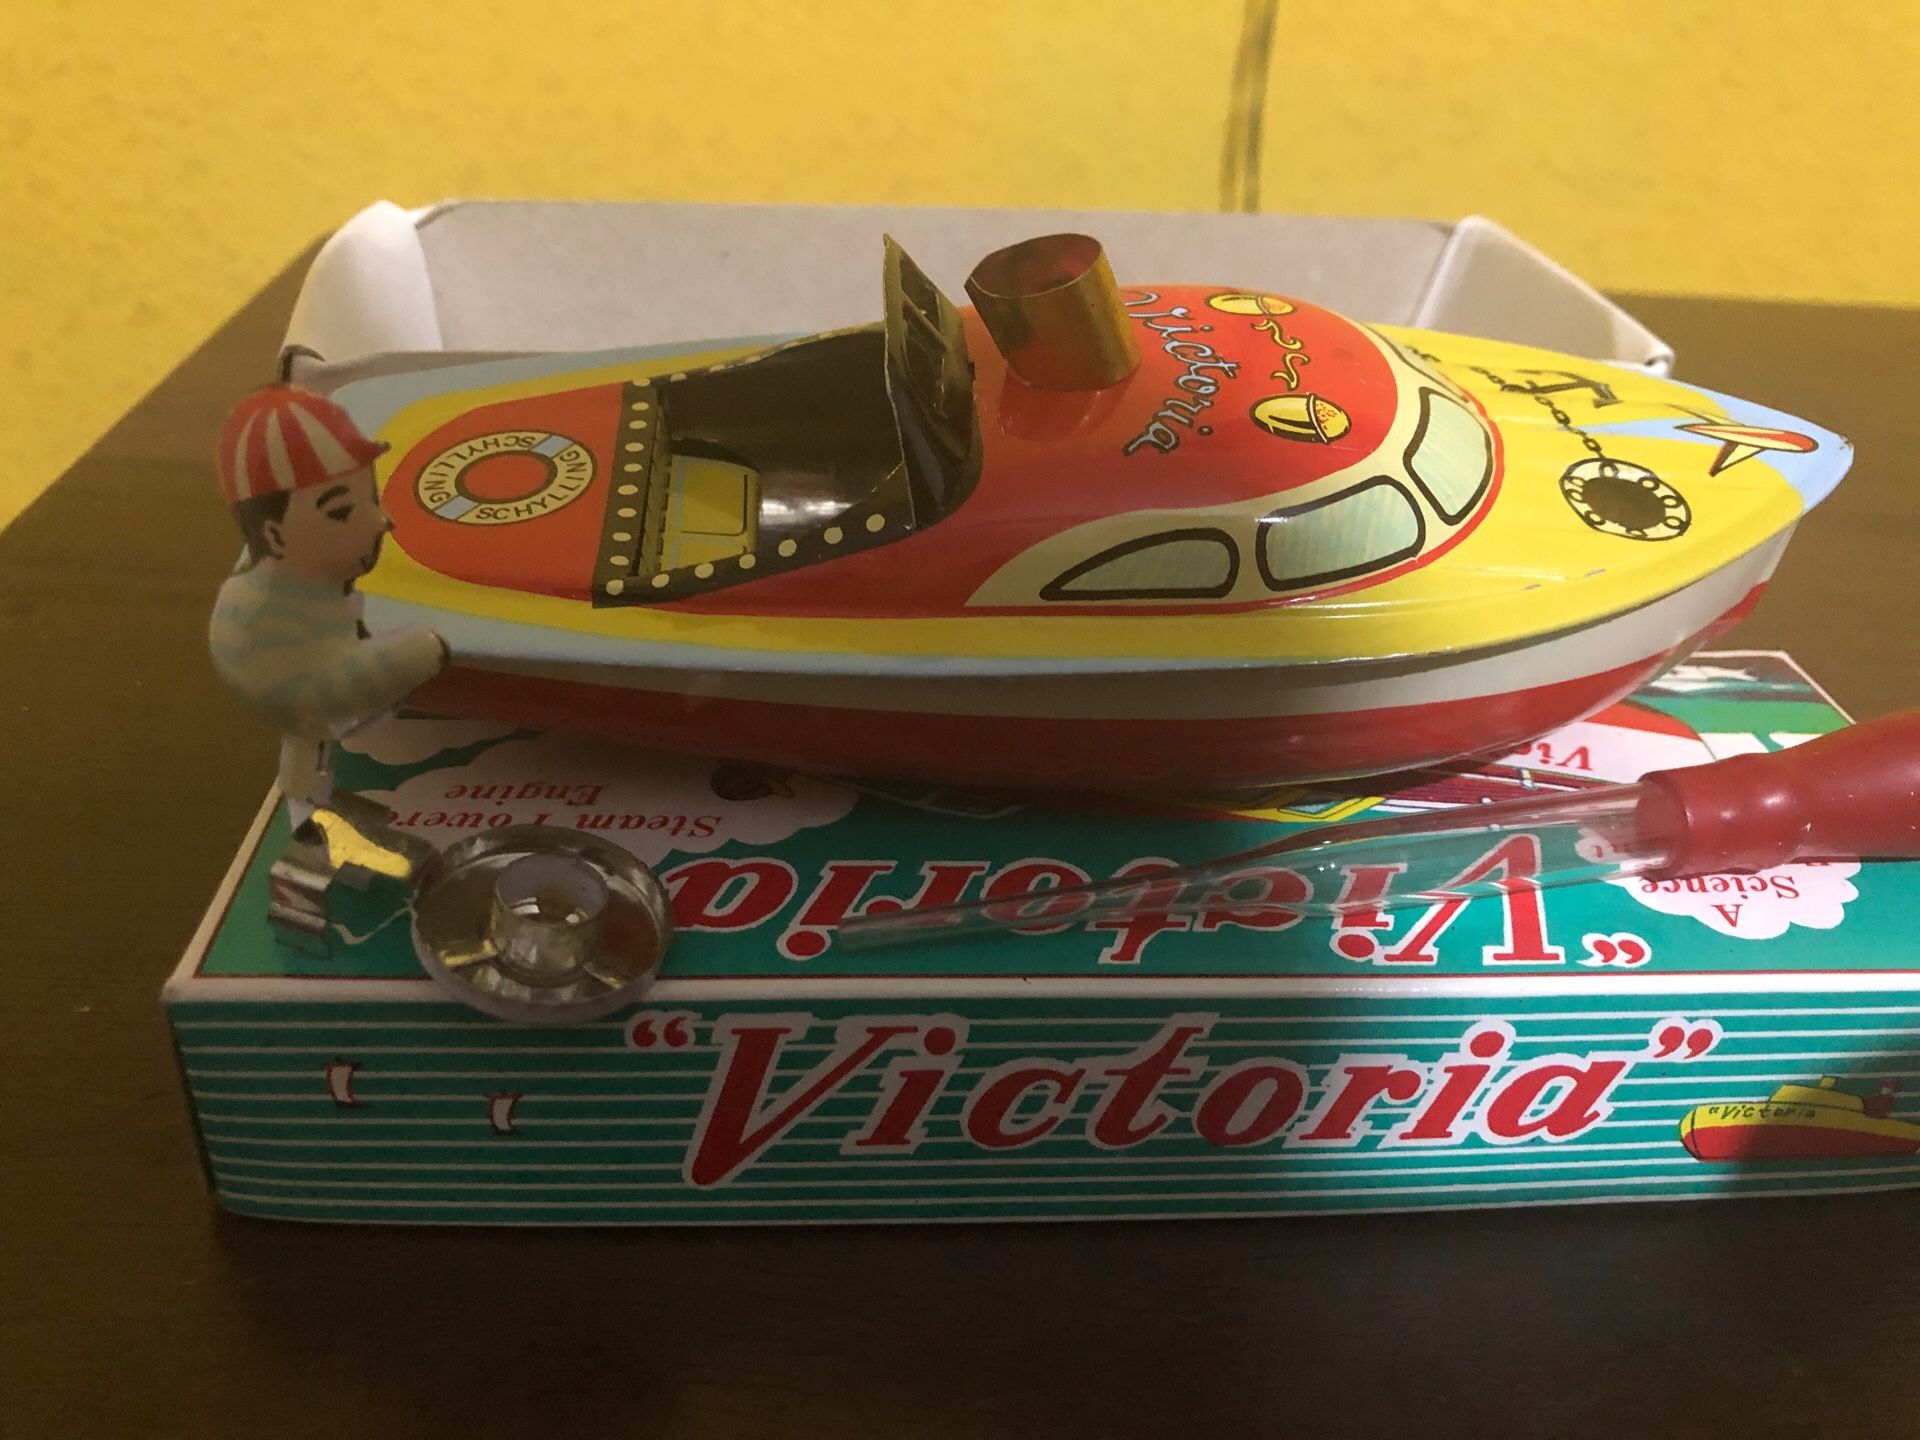 Victoria tin toy boat has a real boiler to power its engine! This traditional English toy is colorful classic floating "pop pop" toy $10